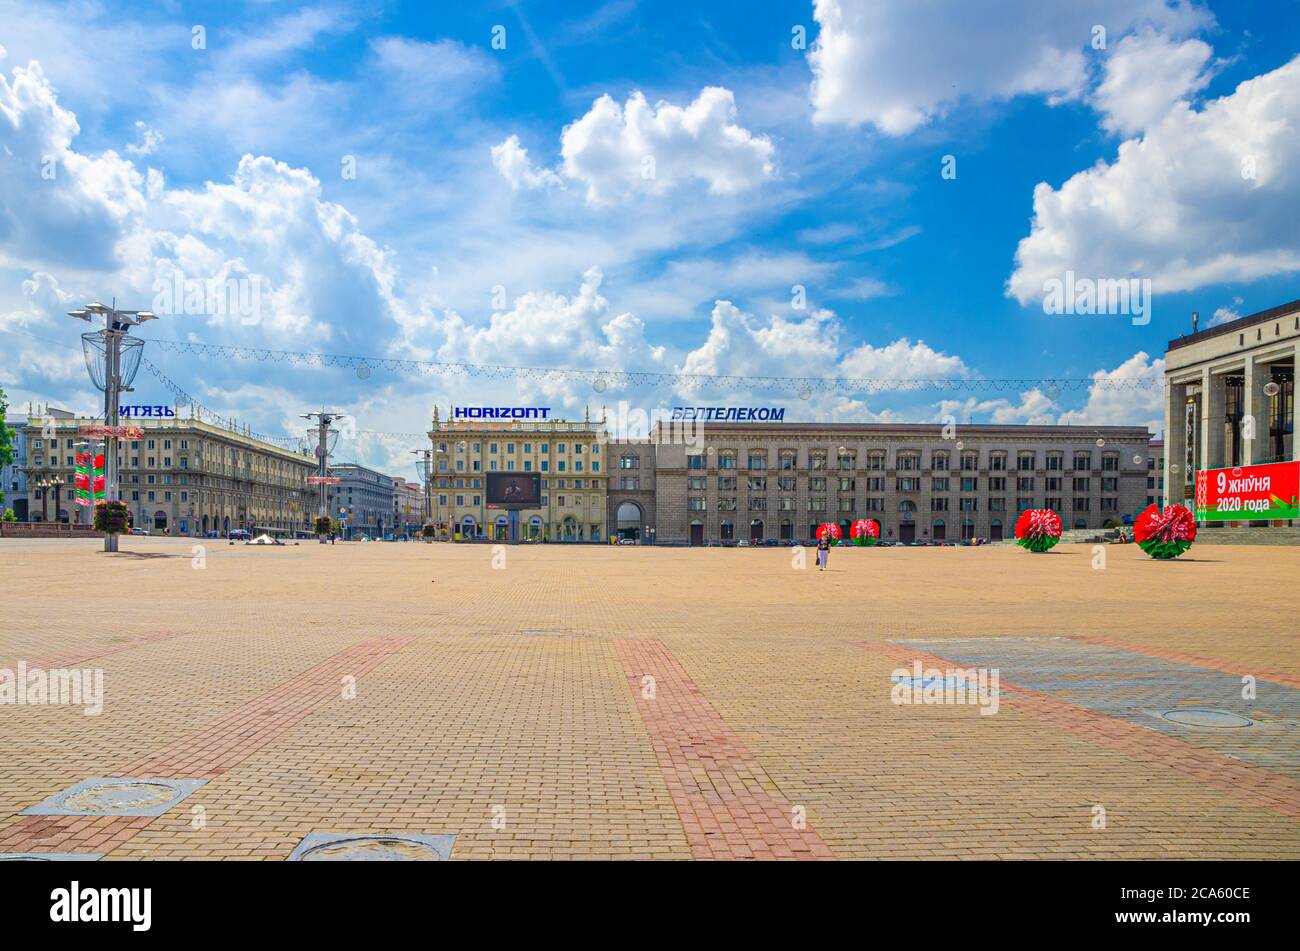 Minsk, Belarus, July 26, 2020: October Square with Socialist Classicism Stalin Empire style buildings, blue sky white clouds in sunny summer day Stock Photo